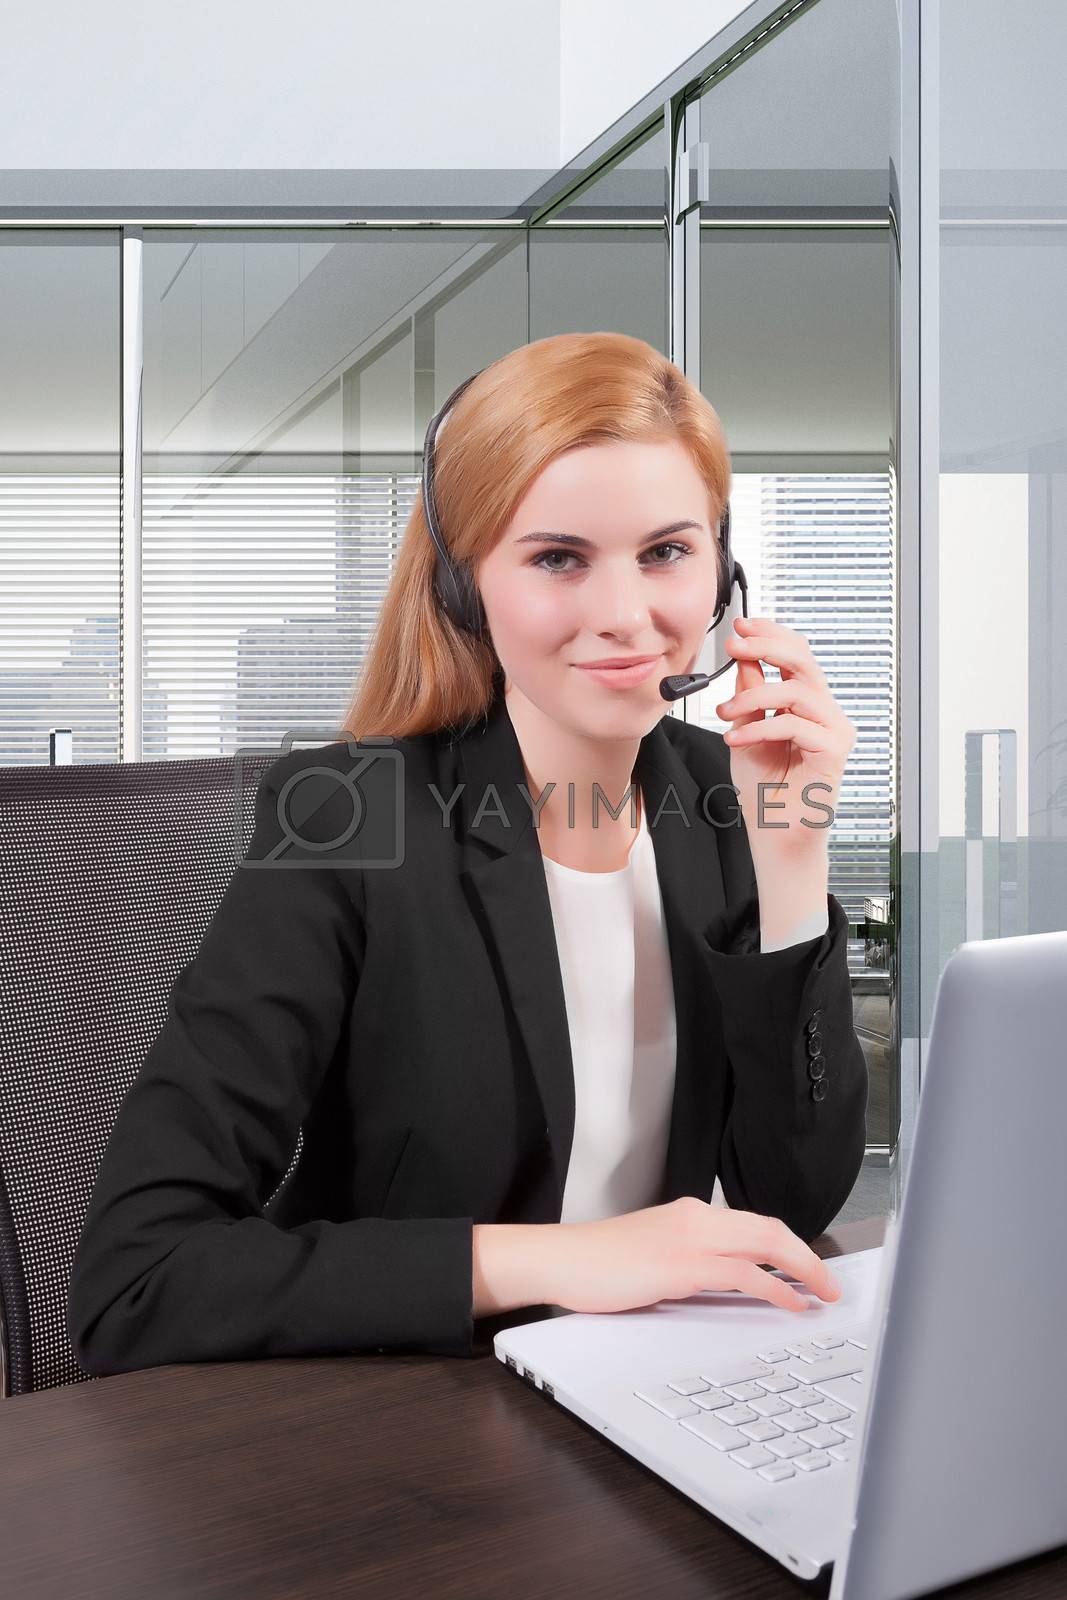 Royalty free image of Businesswoman customer service by matteobragaglio